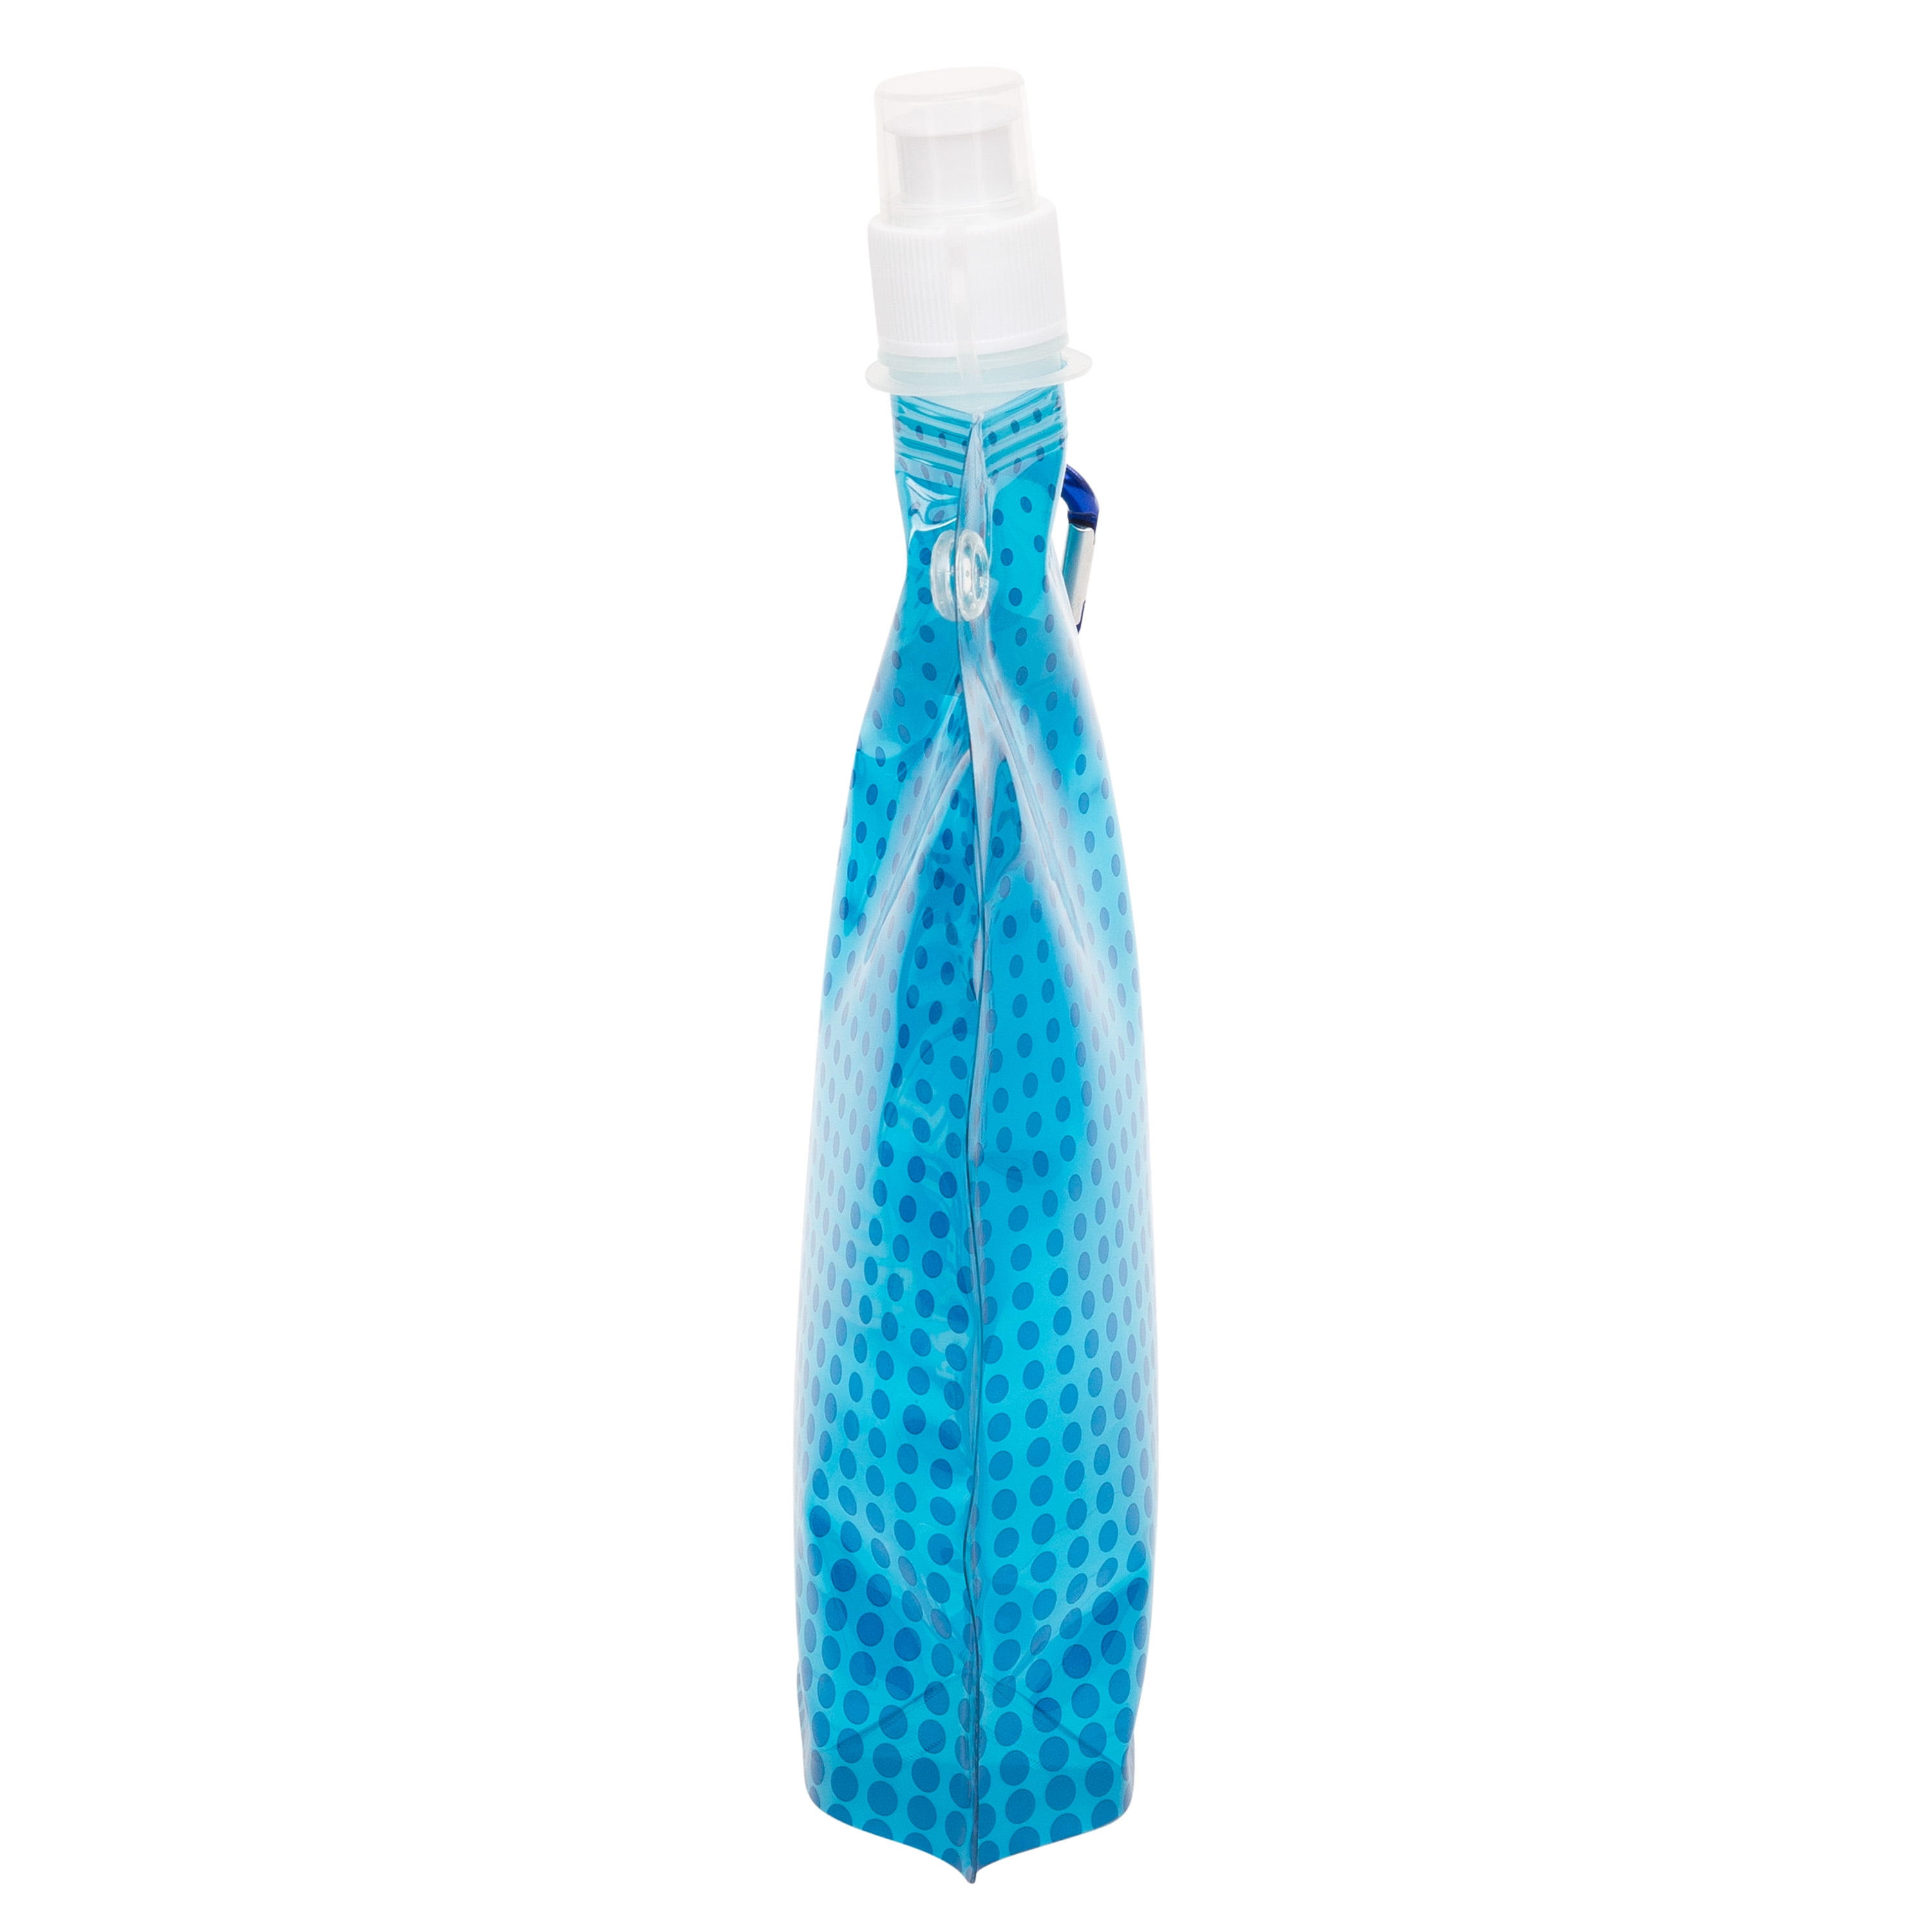 A5 Portable Plastic Water Bottle With Paper Design Sheets Cover, Suitable  For Outdoor Sports And Student Use (korean Style)